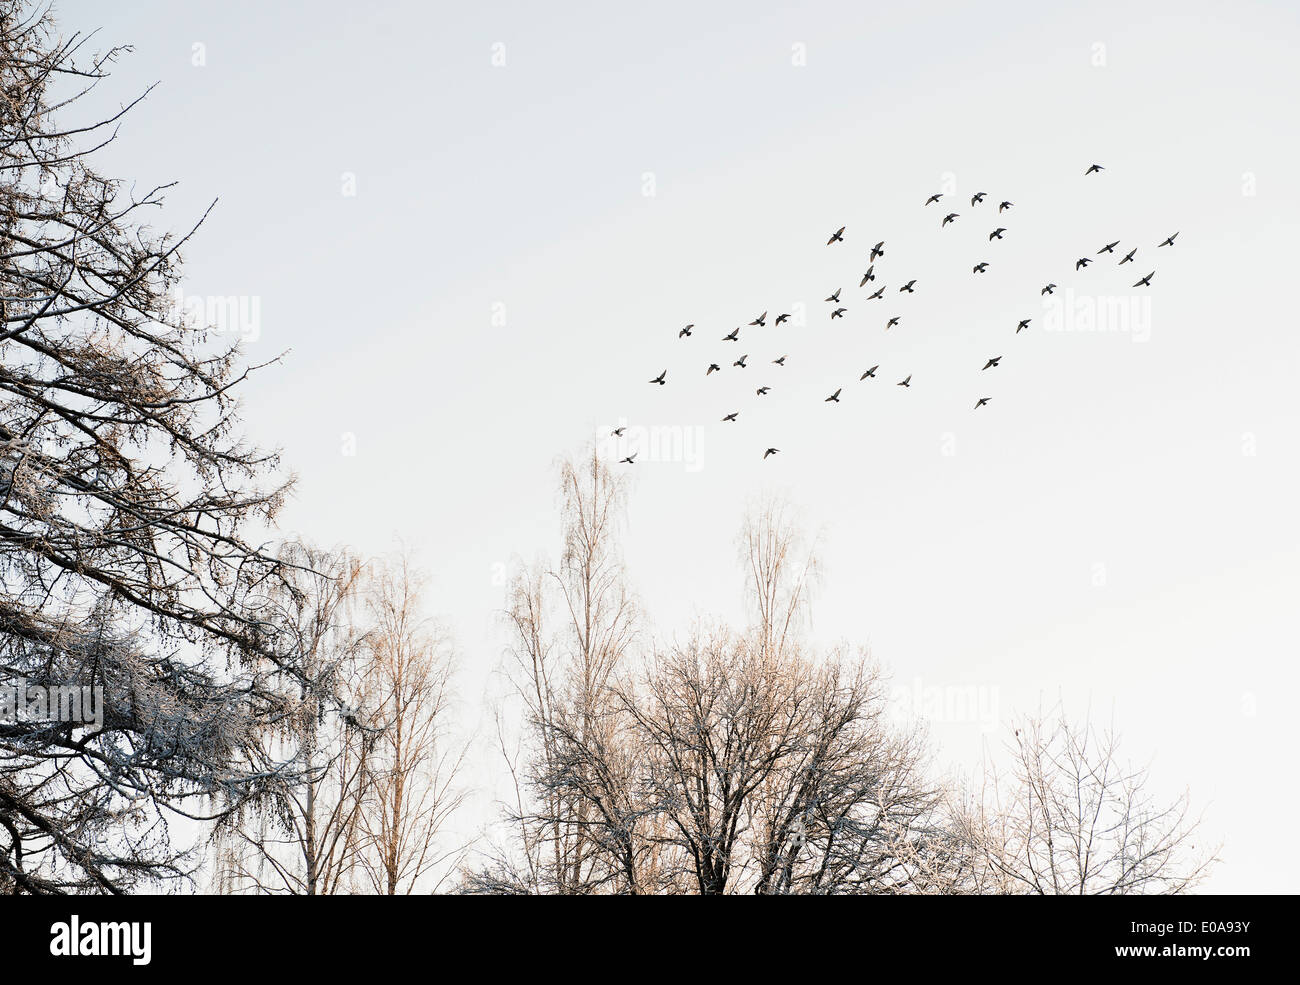 Flock of birds flying over snow-covered trees Stock Photo